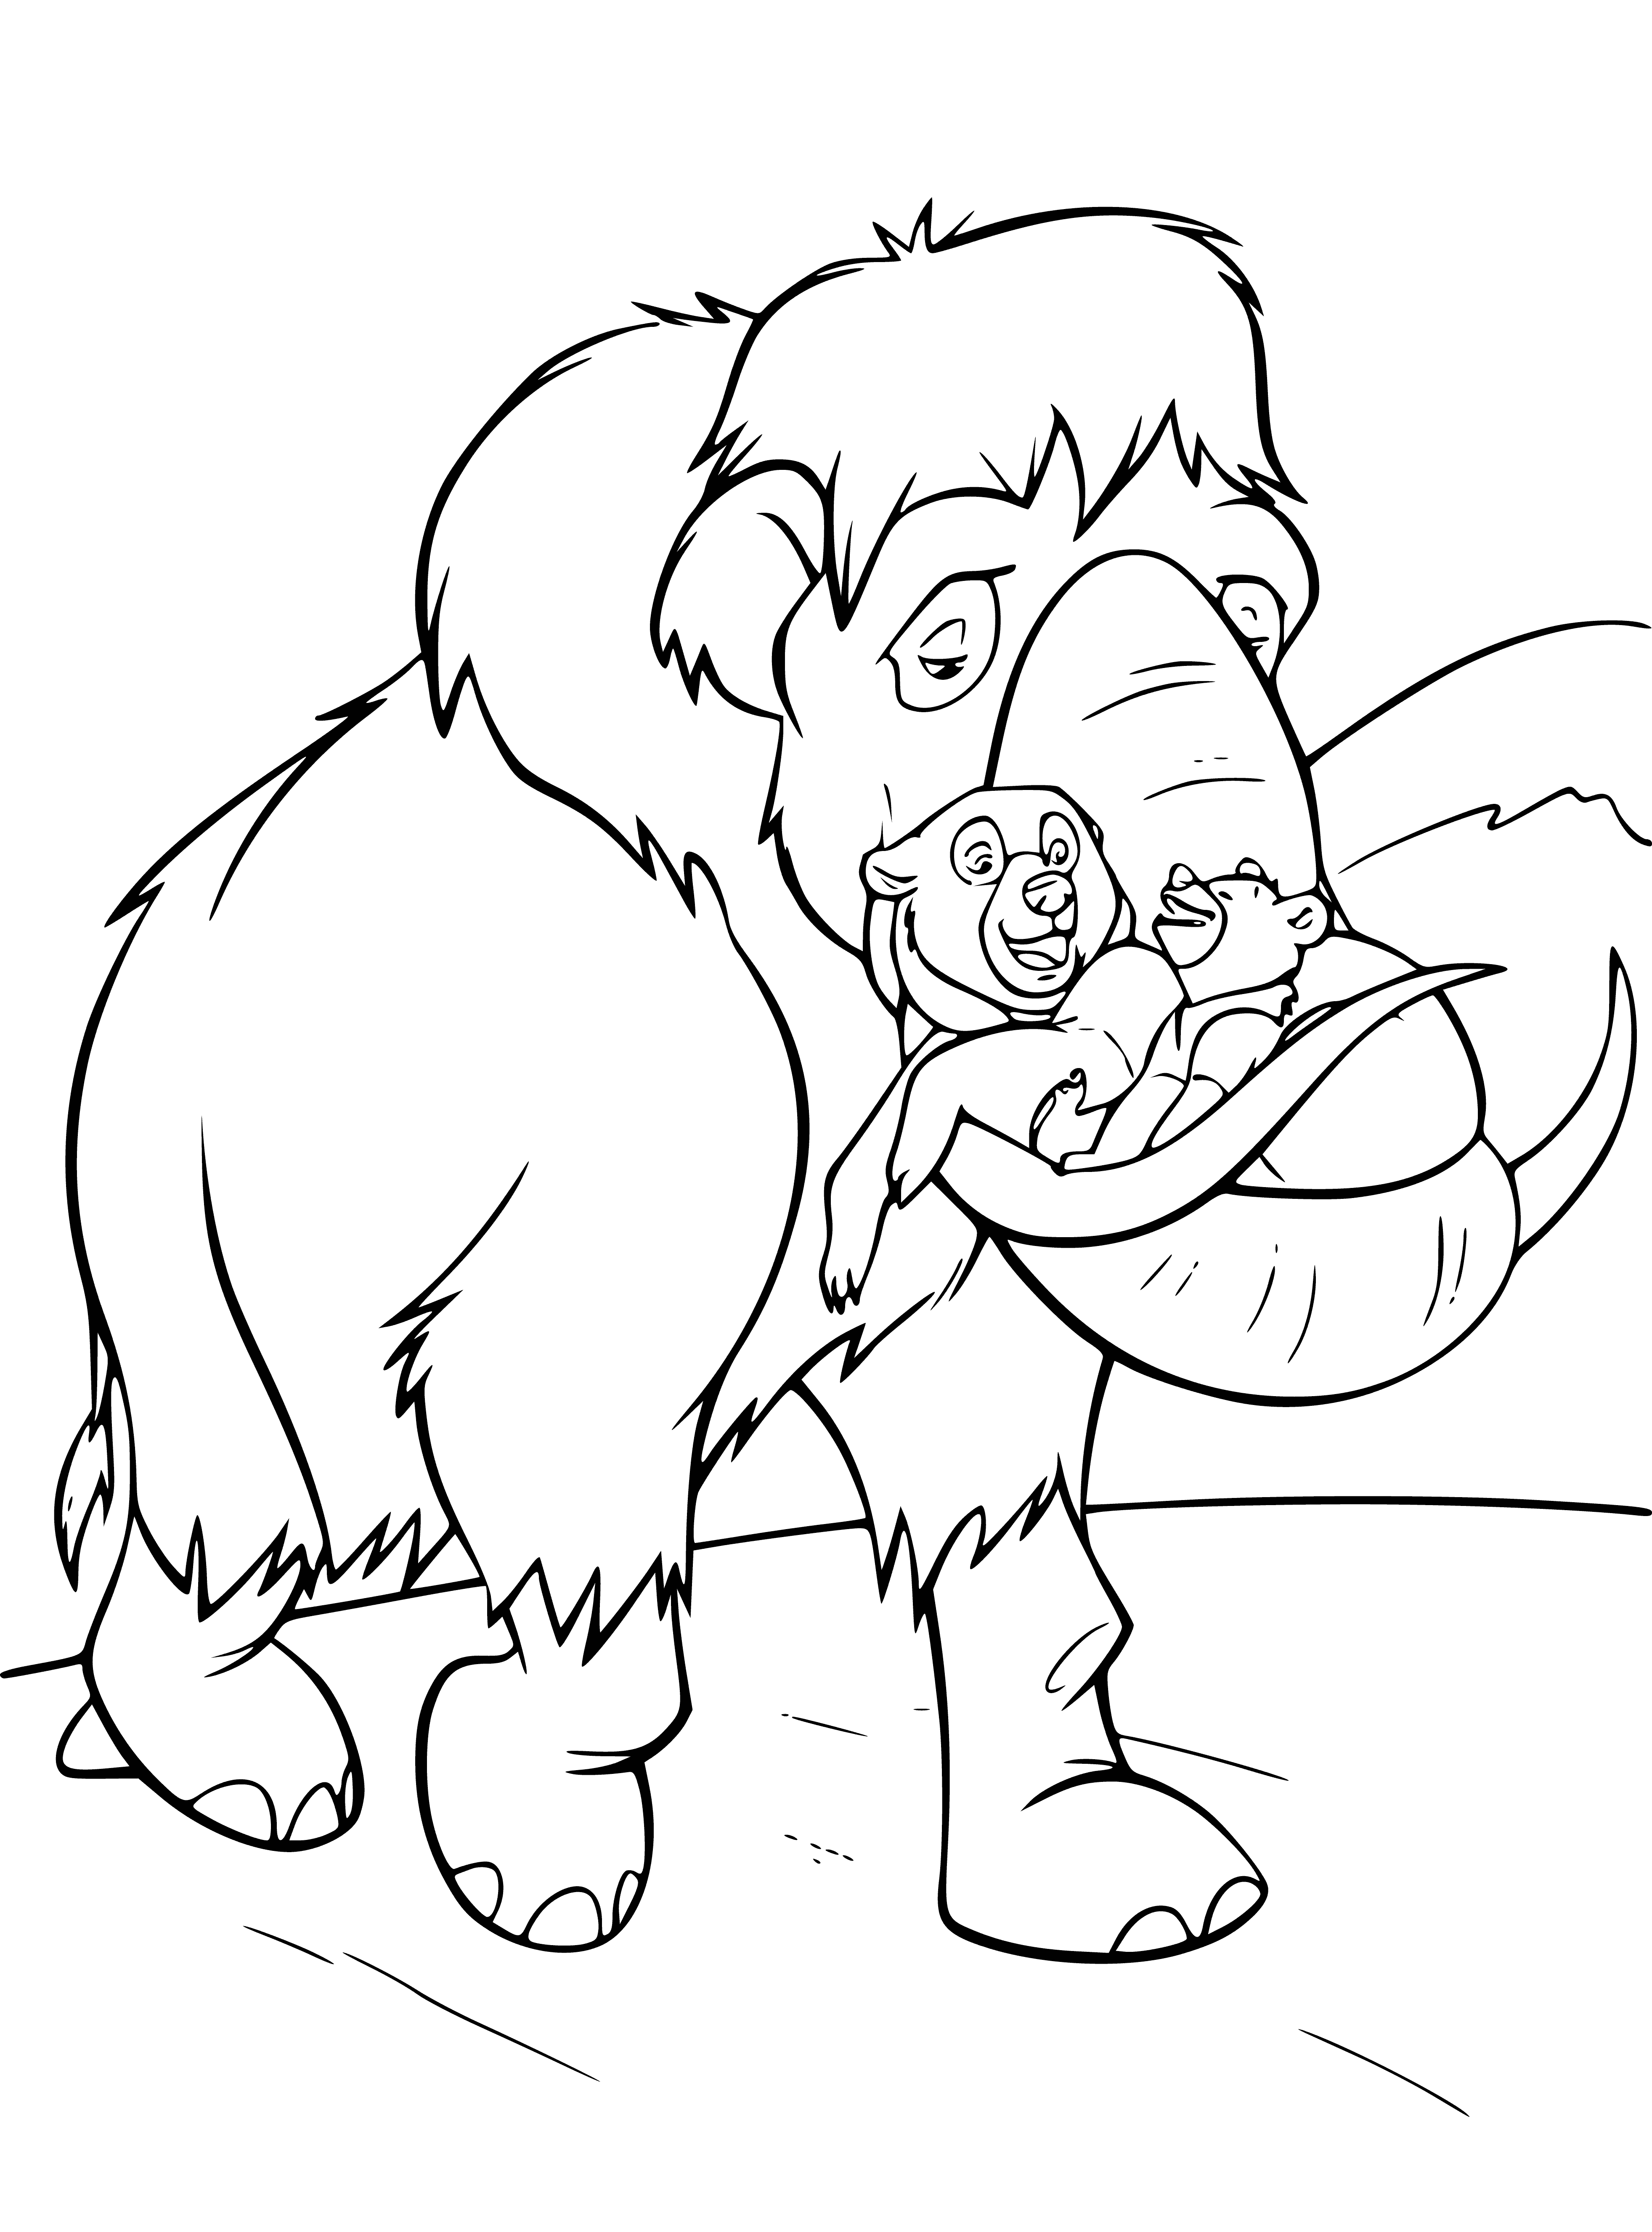 coloring page: Large six-legged furry creature carries two smaller four-legged ones with pointy ears, hugging. Brown and light-colored coats.